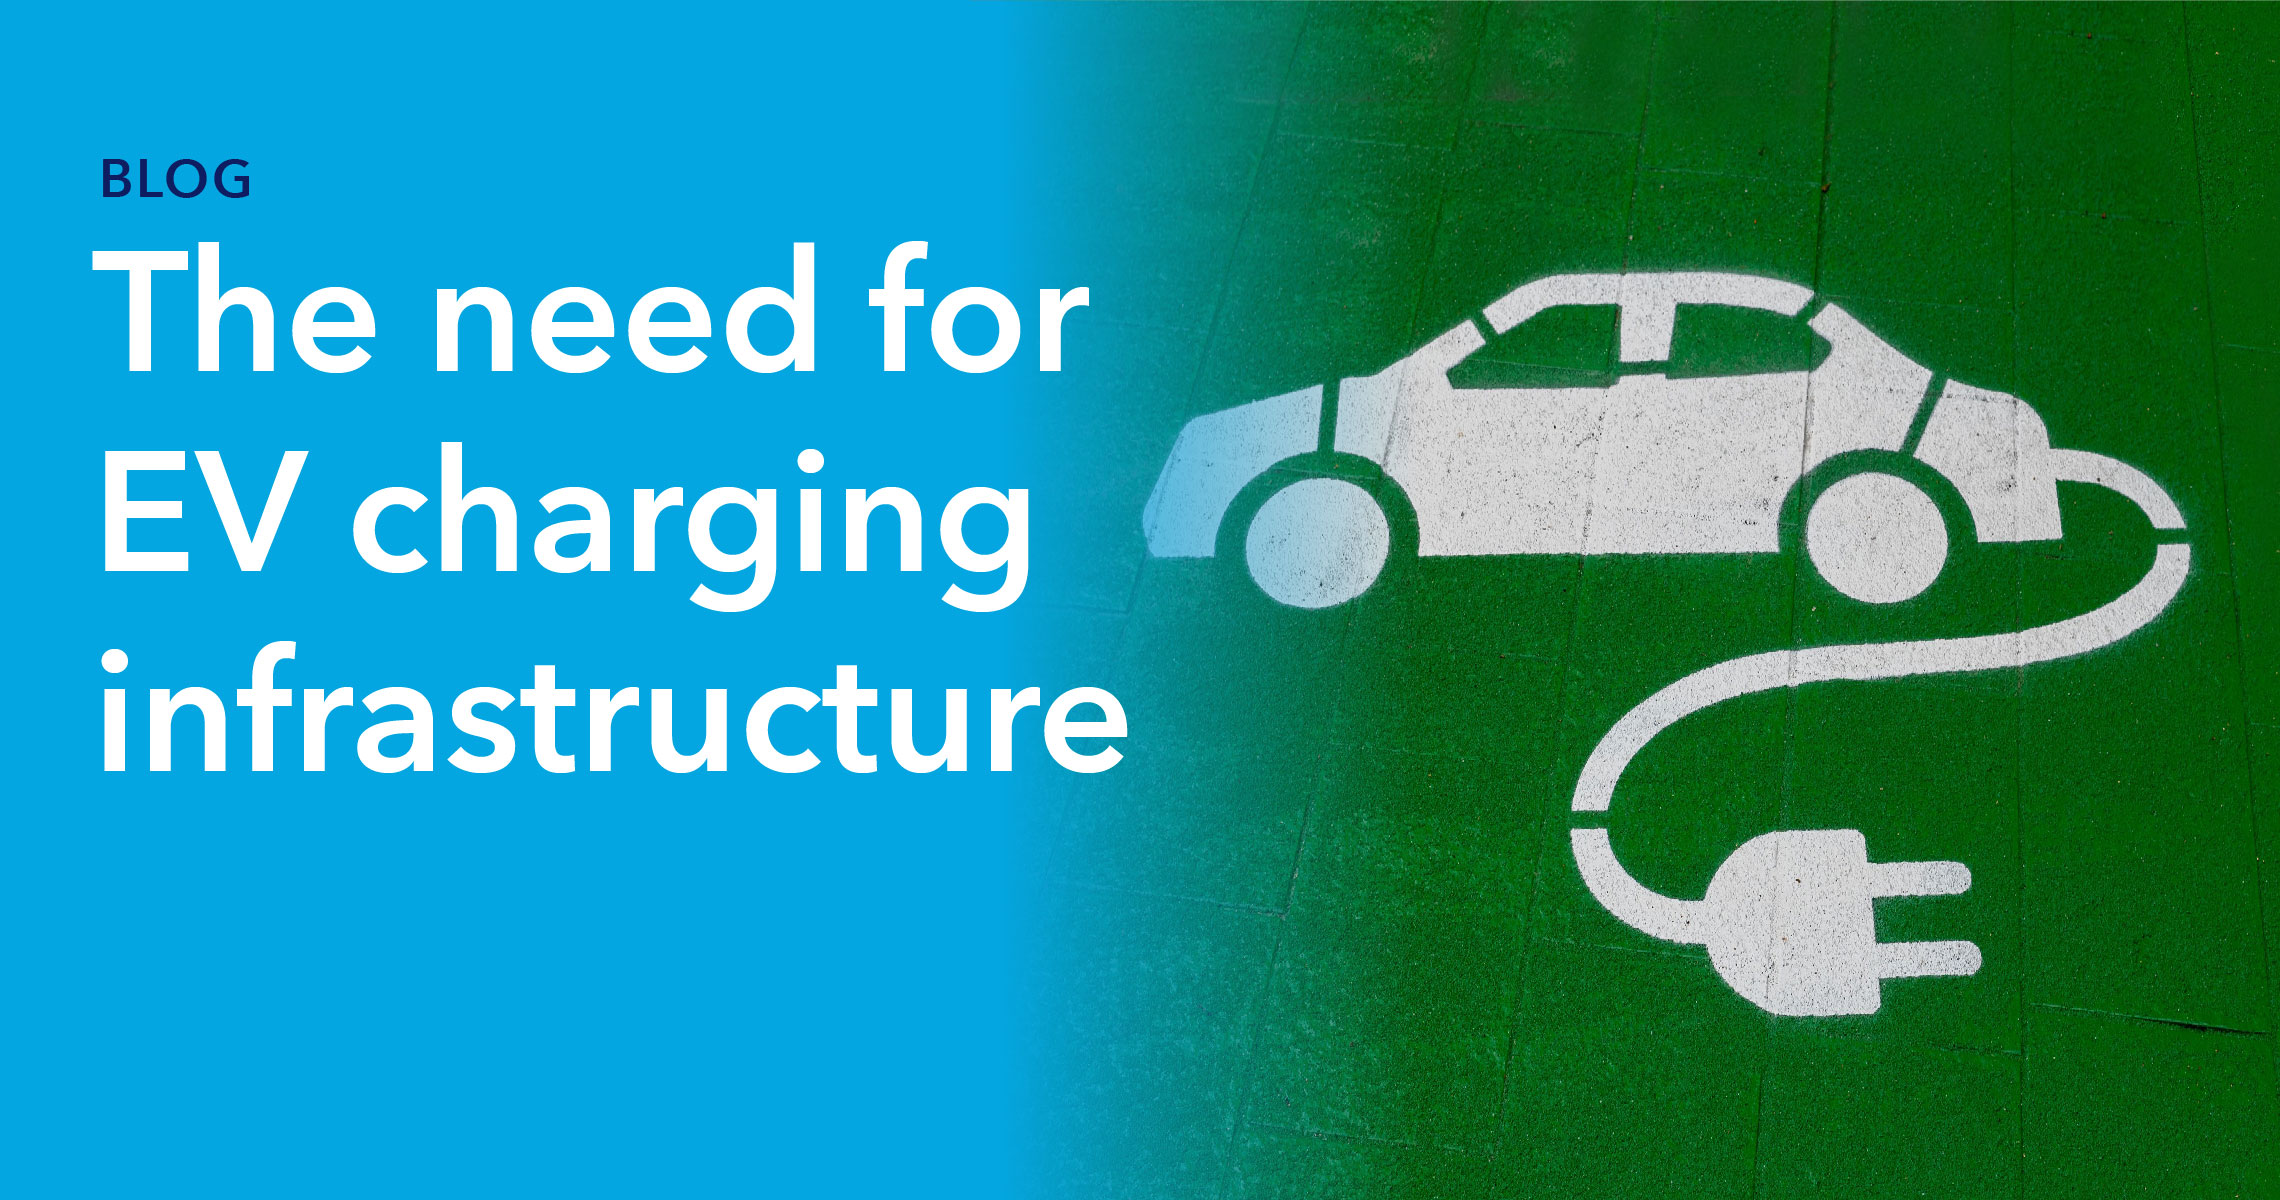 The need for EV charging infrastructure